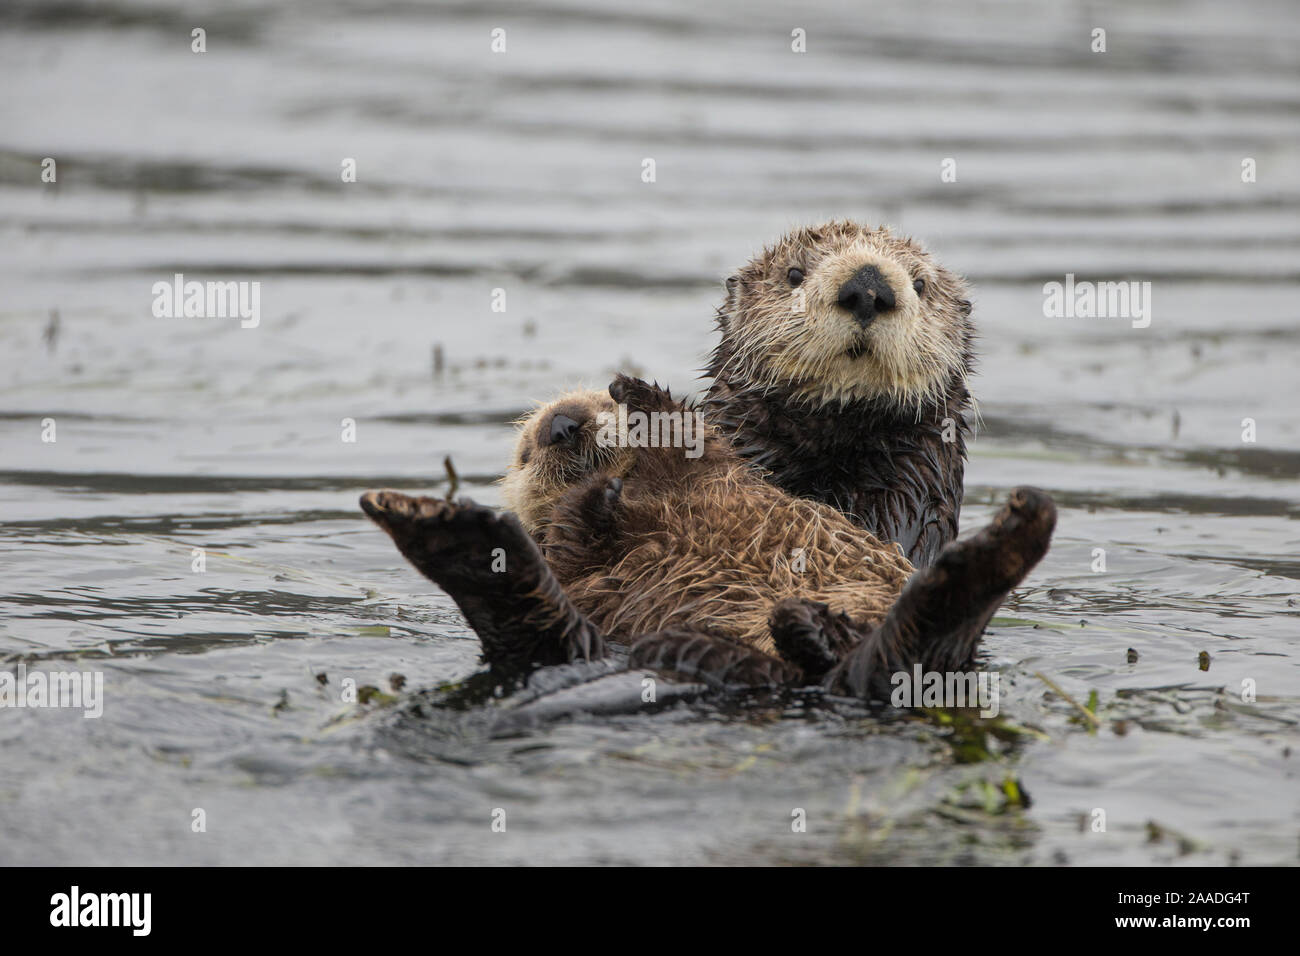 Sea otter (Enhydra lutris) mother and pup, aged 3 weeks, Monterey, California, USA. Stock Photo